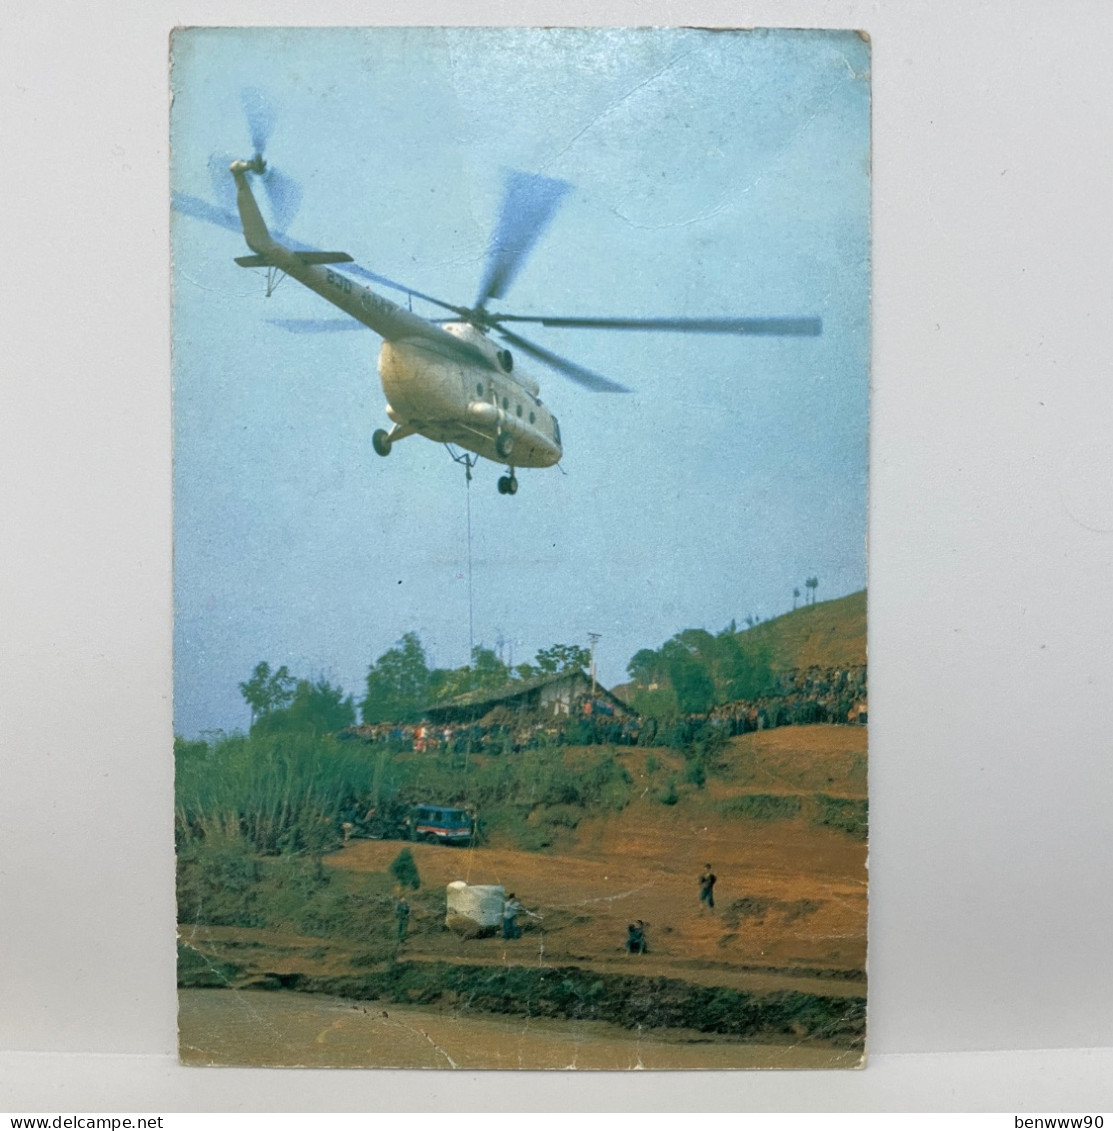 CAAC Heliopter, China Stamped Used 1994 Postcard - Helicopters